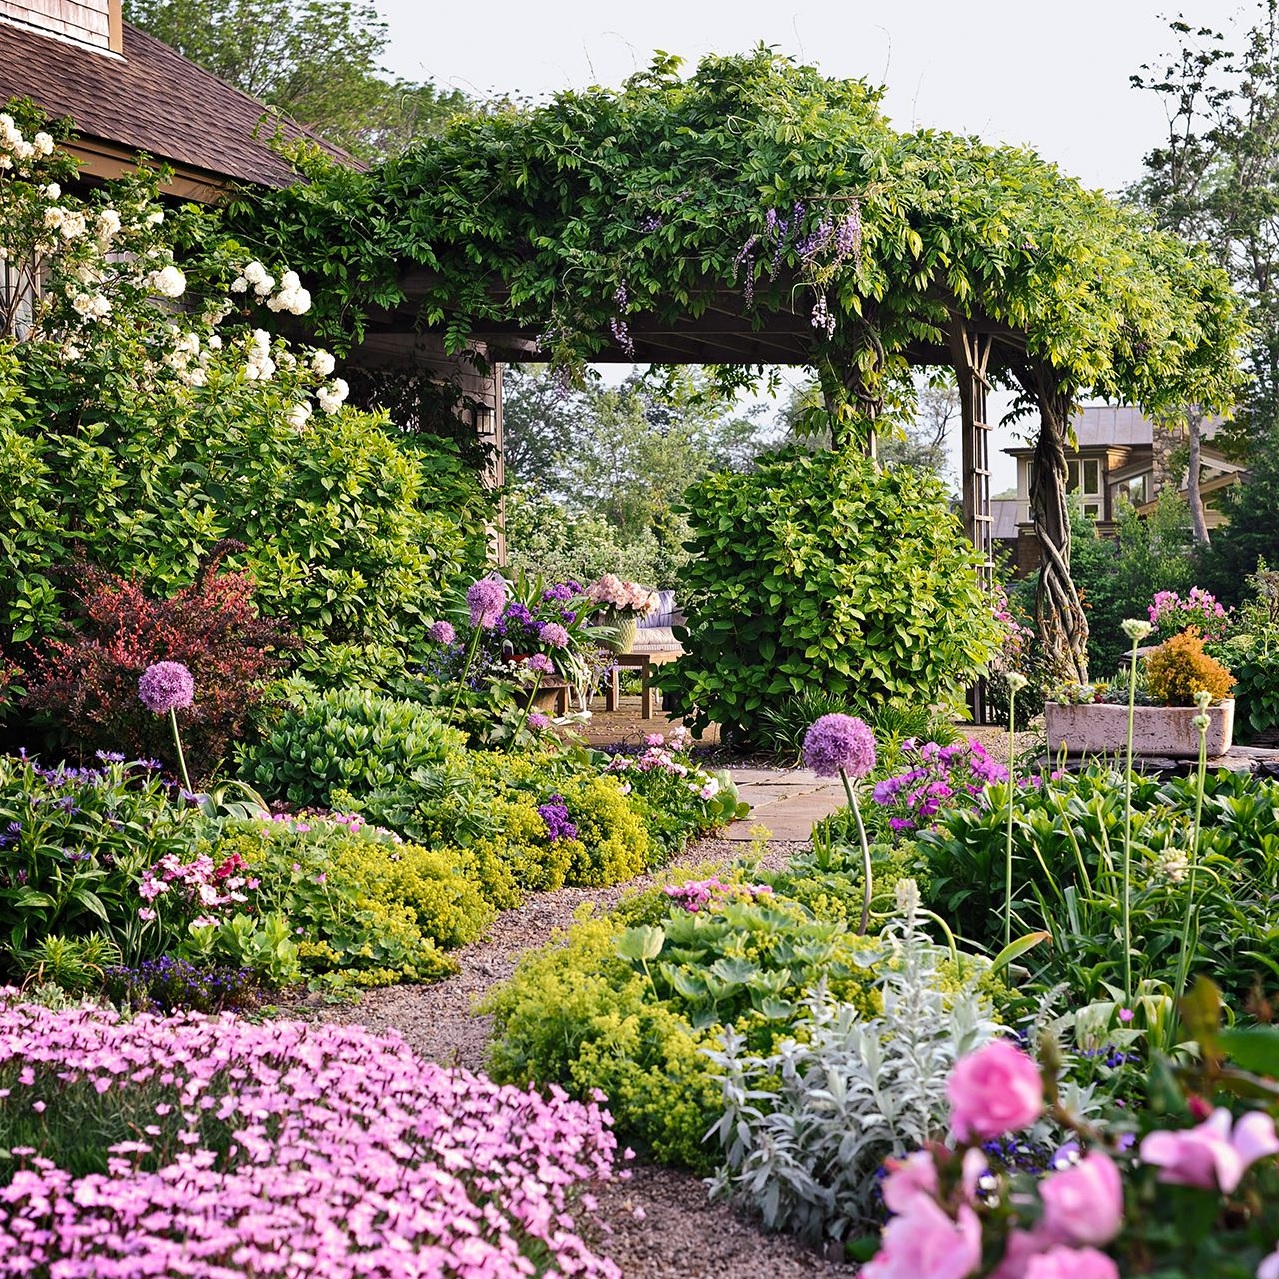 Ideal garden: choosing flowers and caring for them